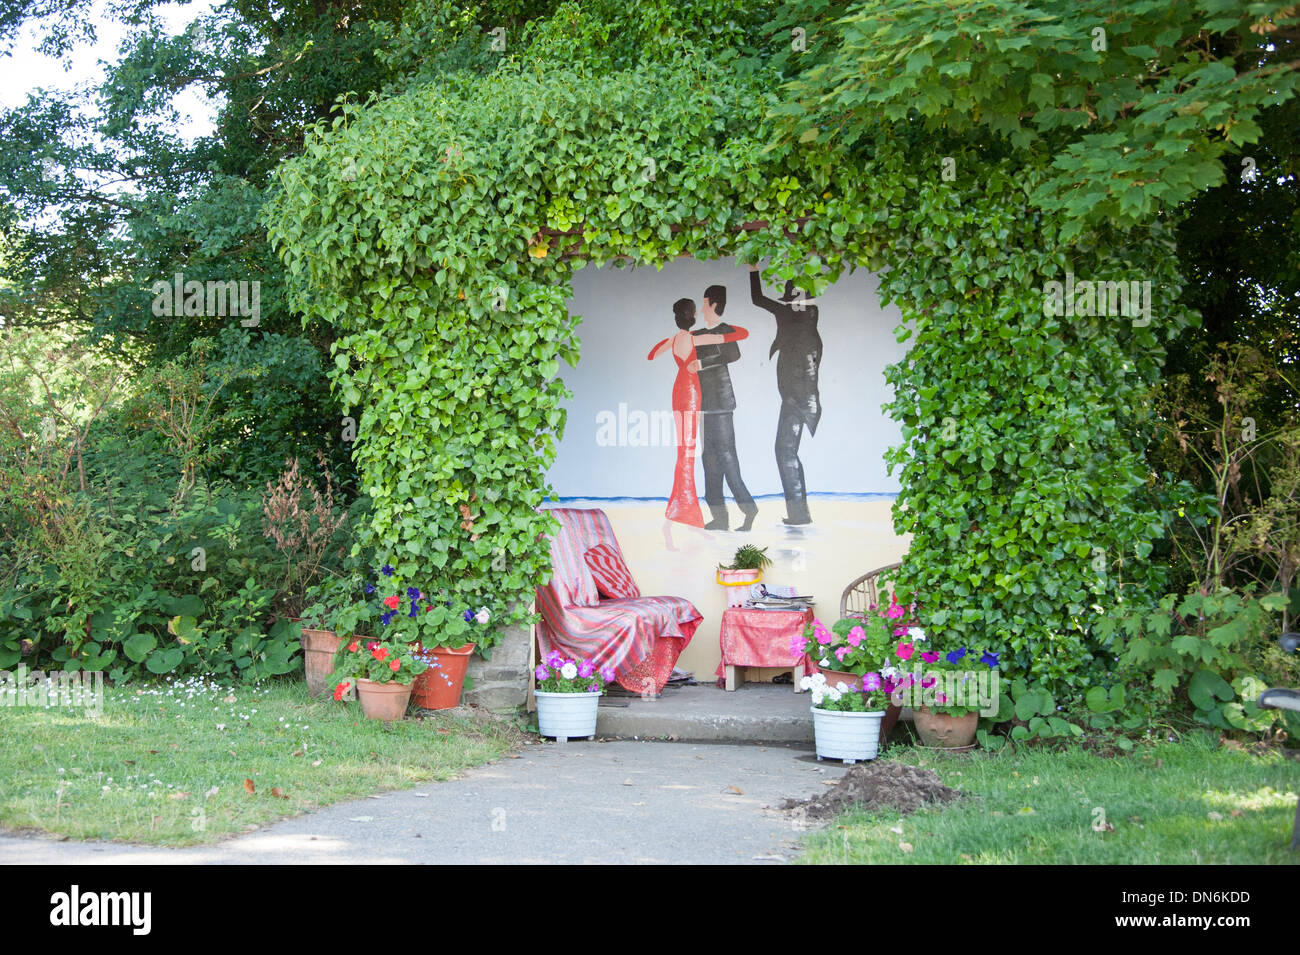 Flowery Highly Decorated Bus Stop Village Greenery Stock Photo